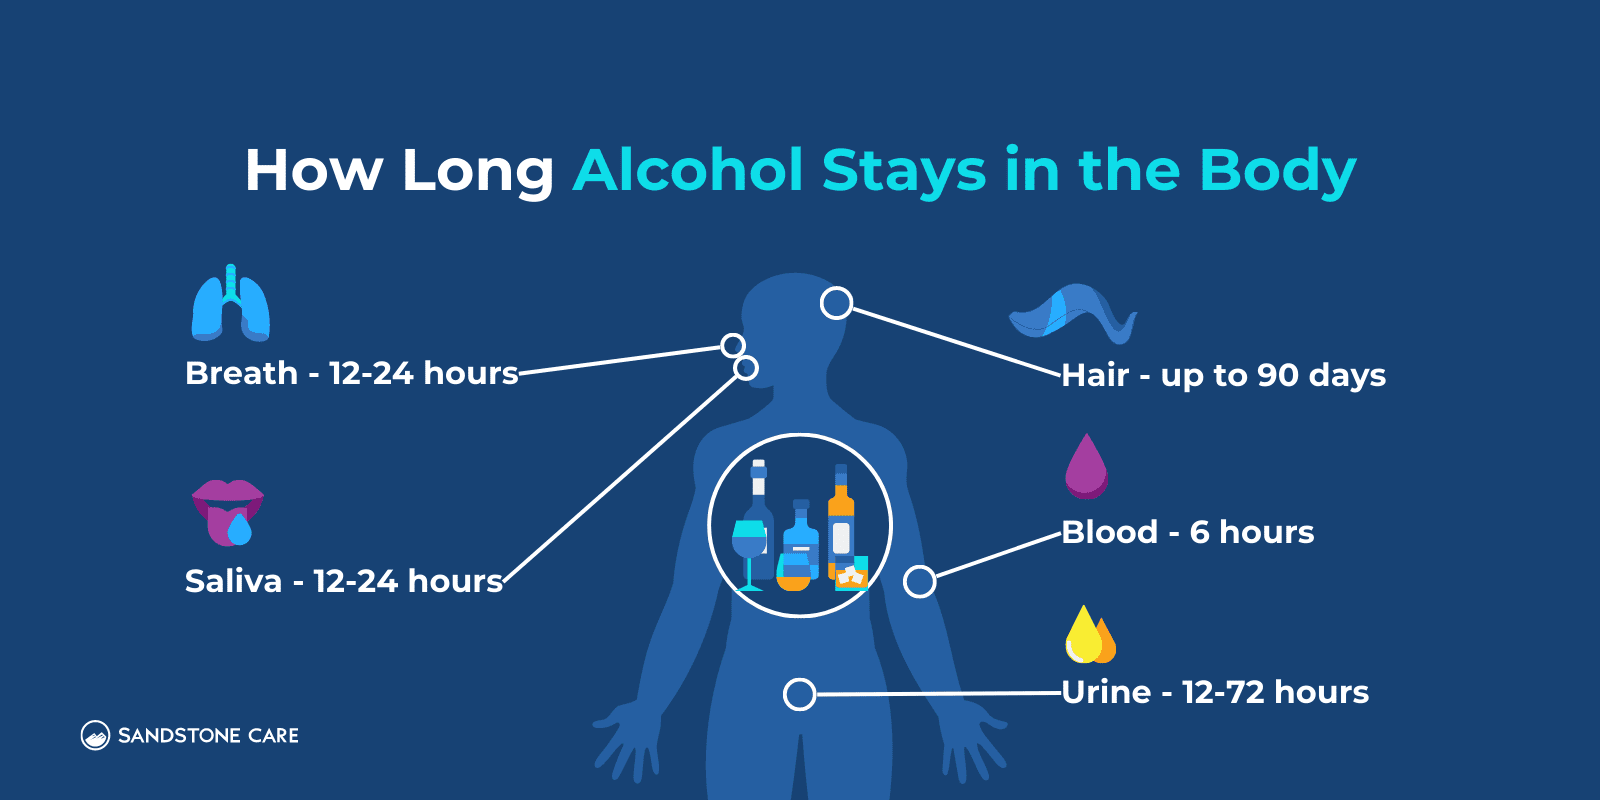 "How Long Does Alcohol Stay In the Body" represented using an illustration of body parts